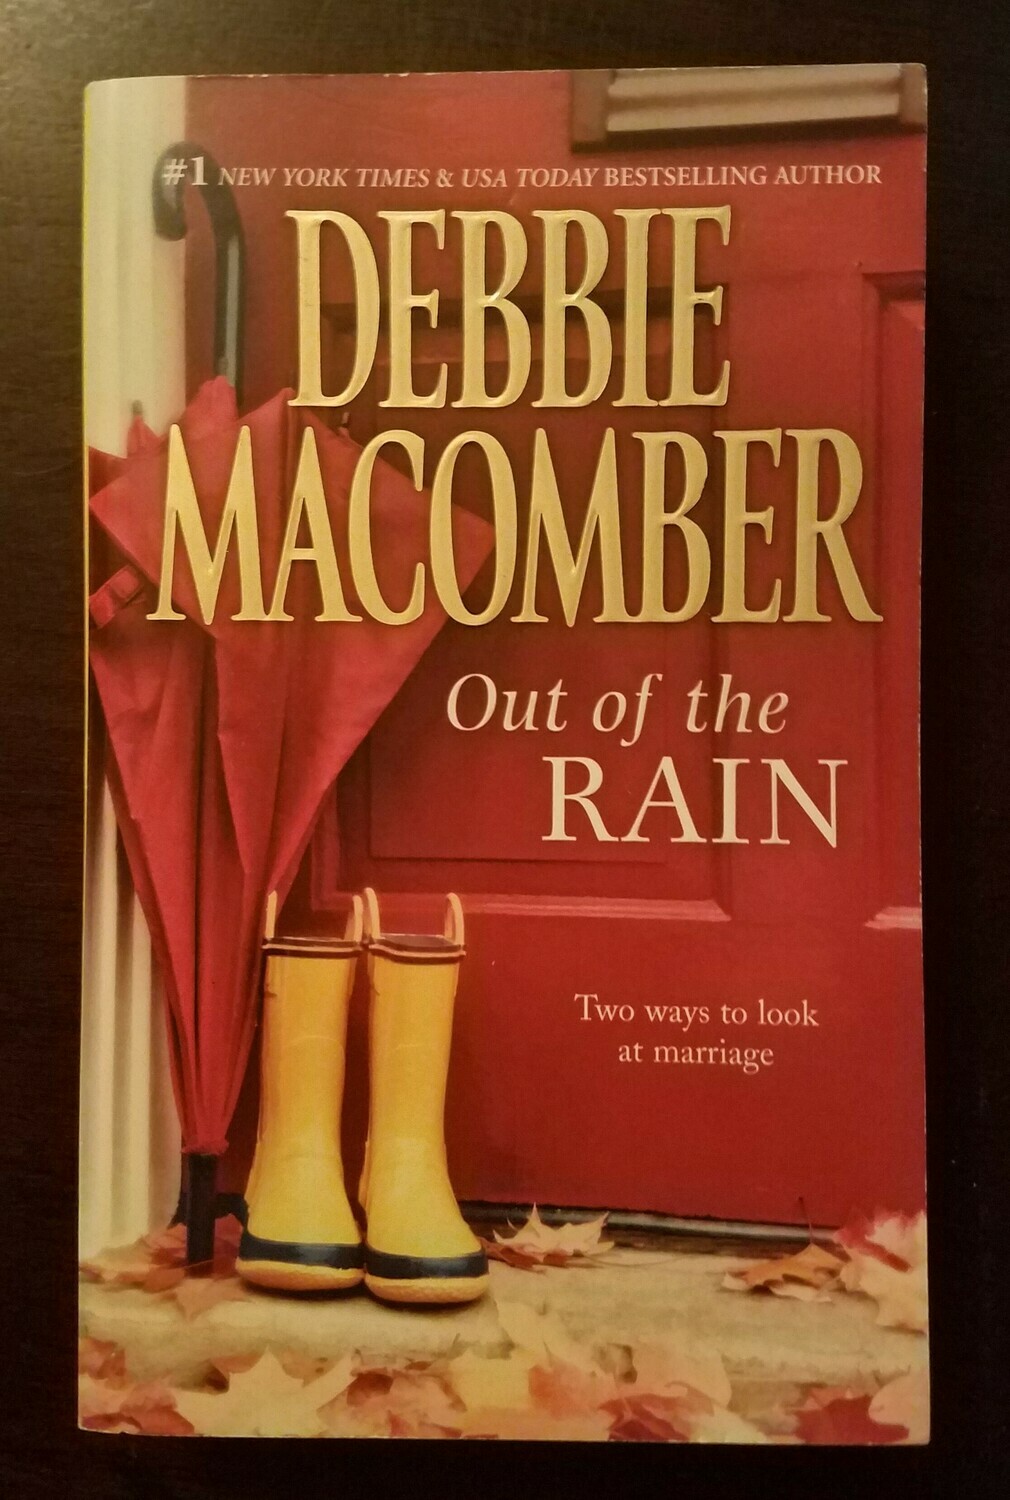 Out of the Rain by Debbie Macomber